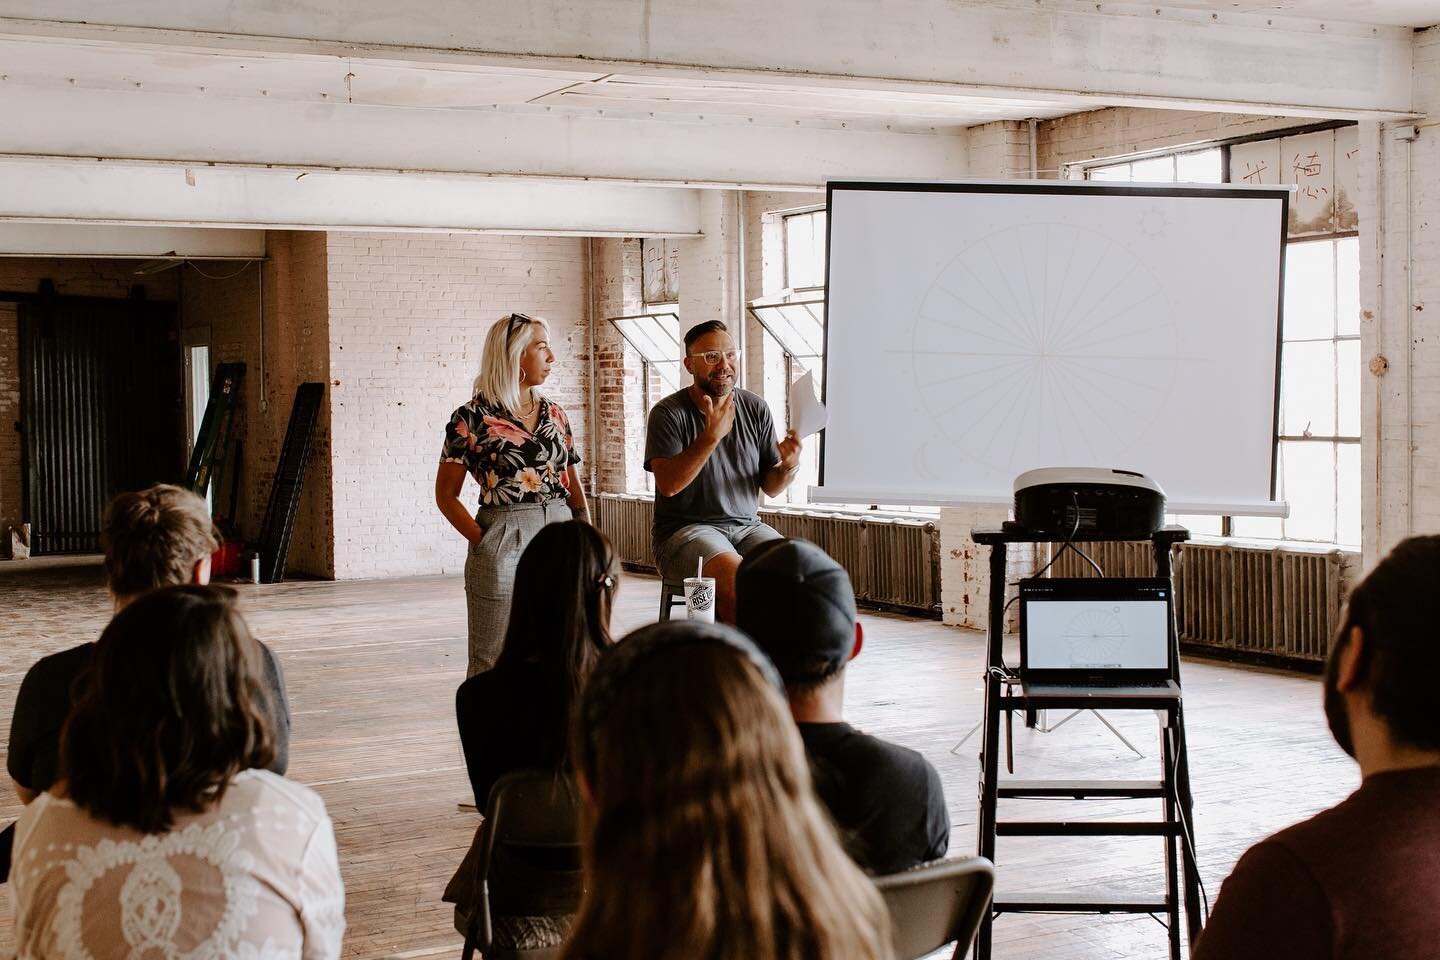 Us at the CULTIVATE speaker session talking with our hands. 😂

We get really excited to discuss creativity and the freedom of expressing yourself.

@silo.us put on a seriously impressive event, and we&rsquo;re so grateful to have had a chance to spe